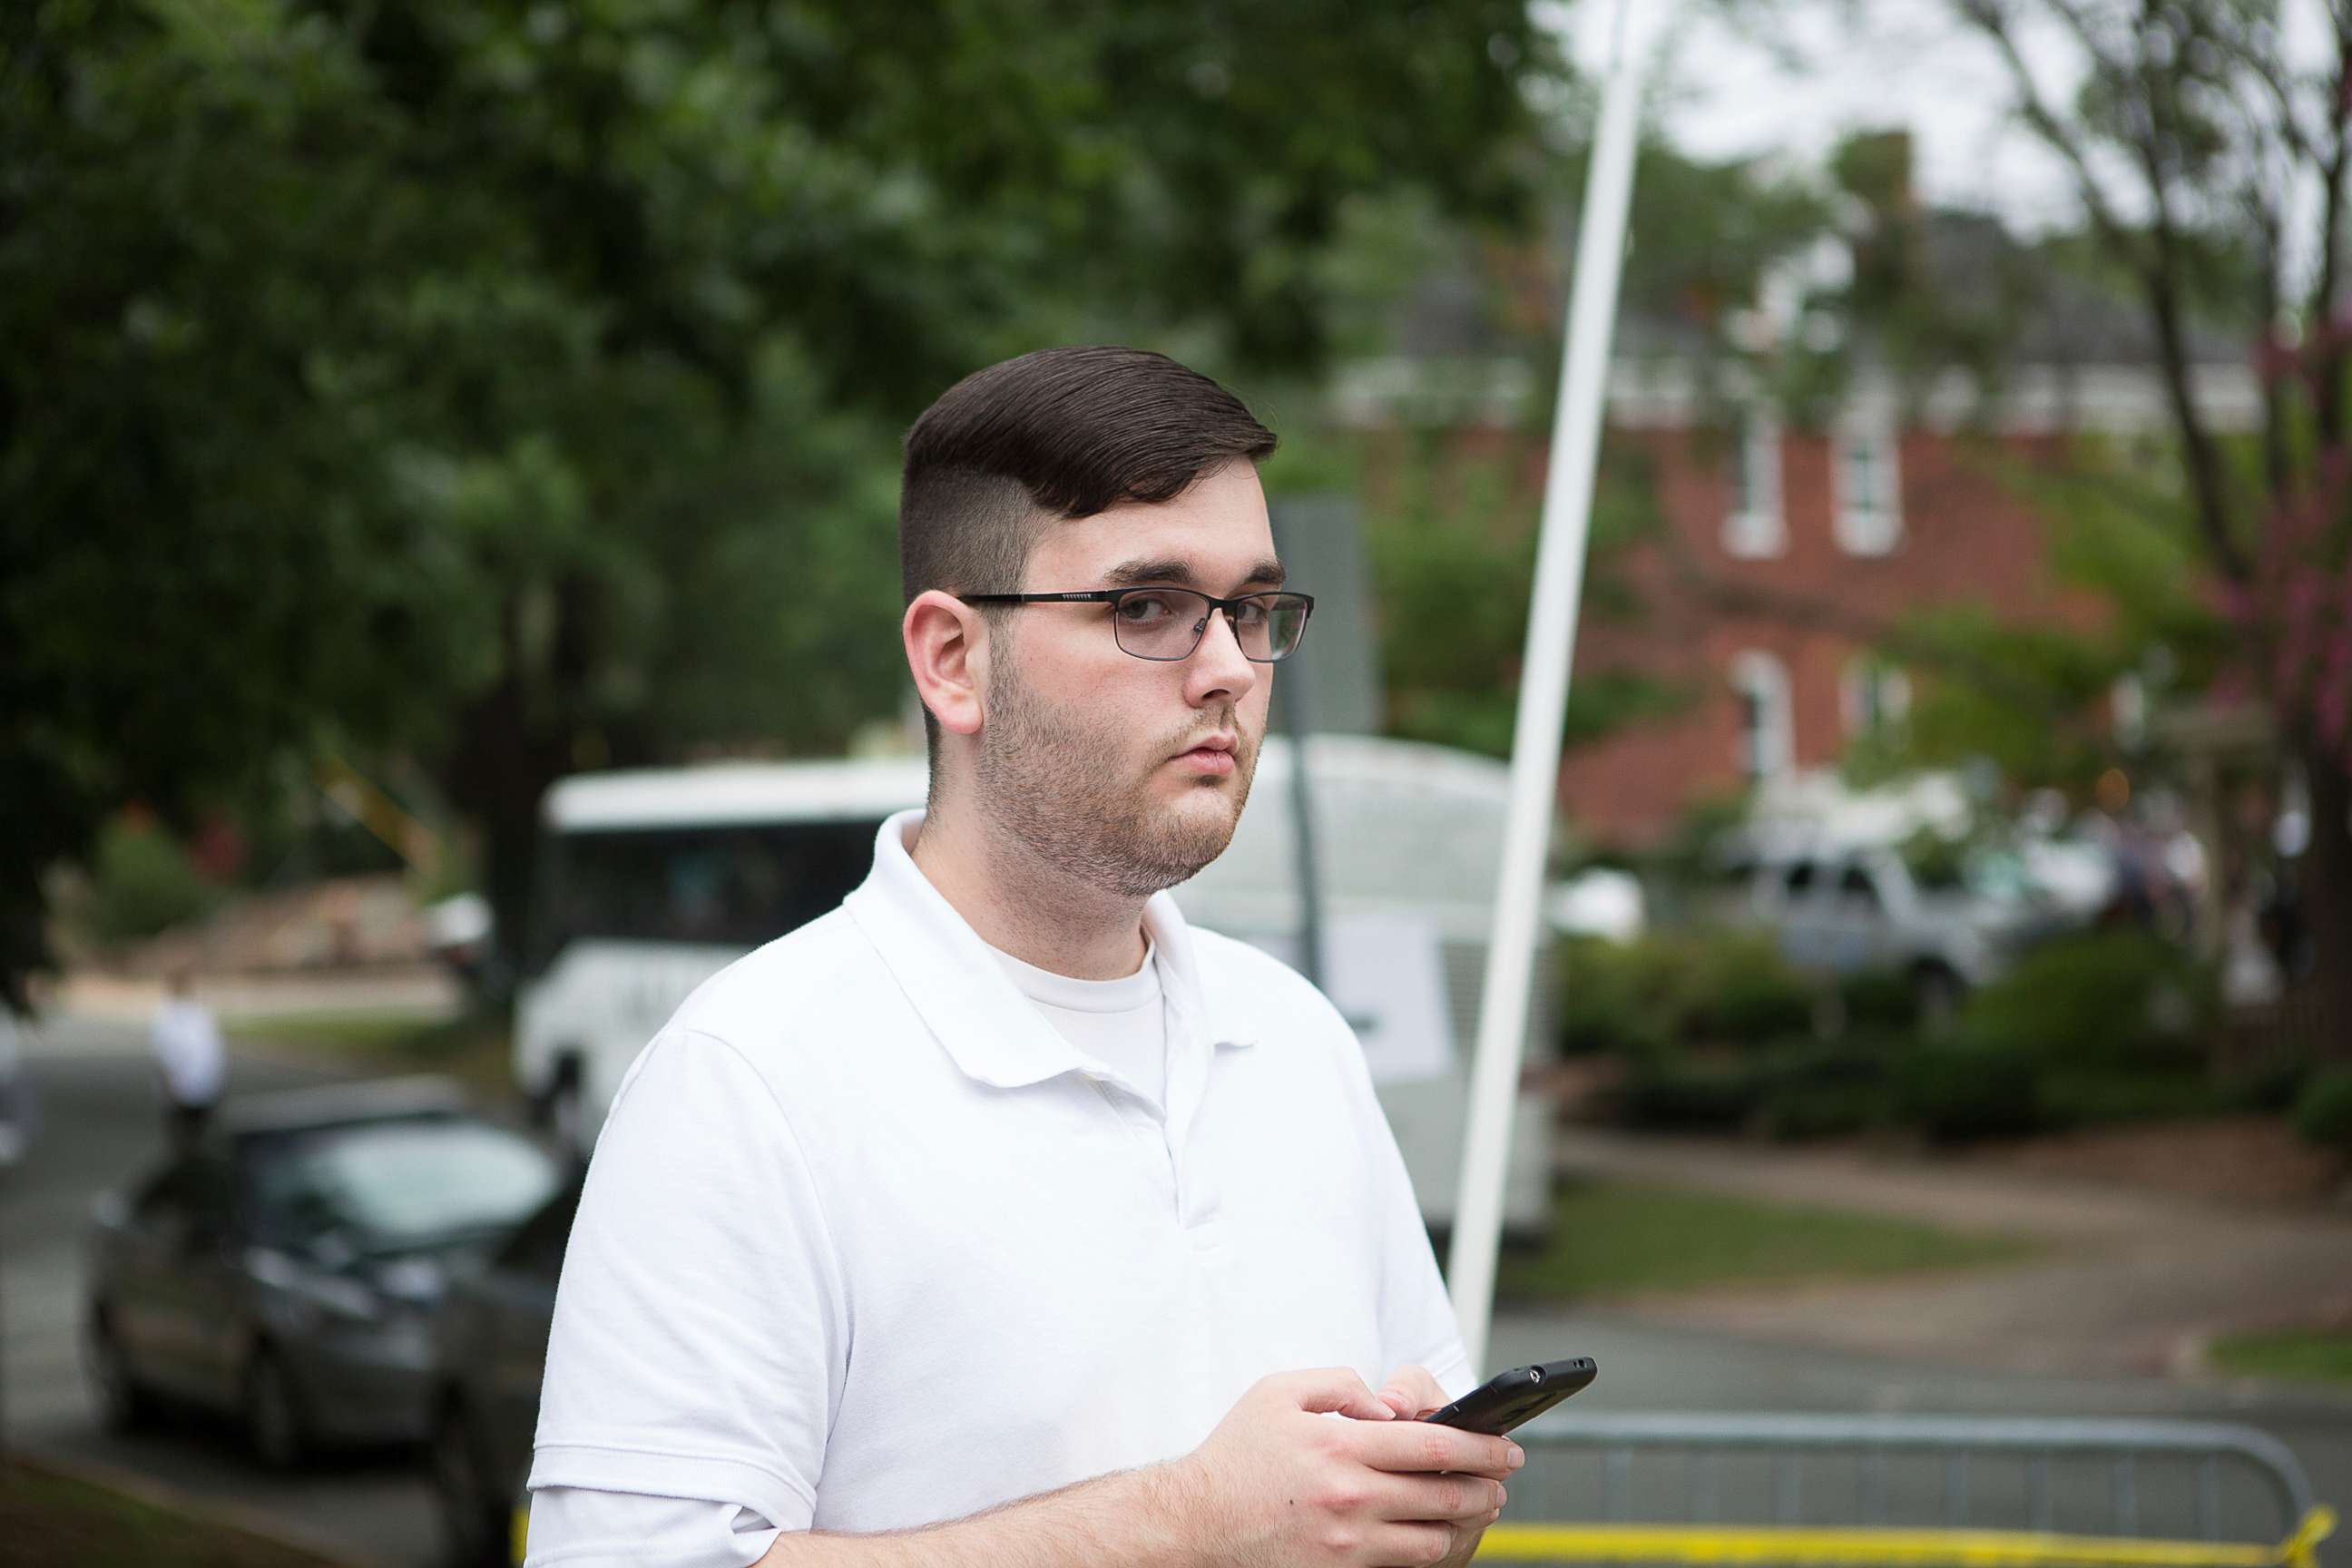 PHOTO: In this Saturday, Aug. 12, 2017, photo, James Alex Fields Jr. stands on the sidewalk looking at the procession of the clergy as they gathered at McGaffey park, ahead of a rally in Charlottesville, Va.